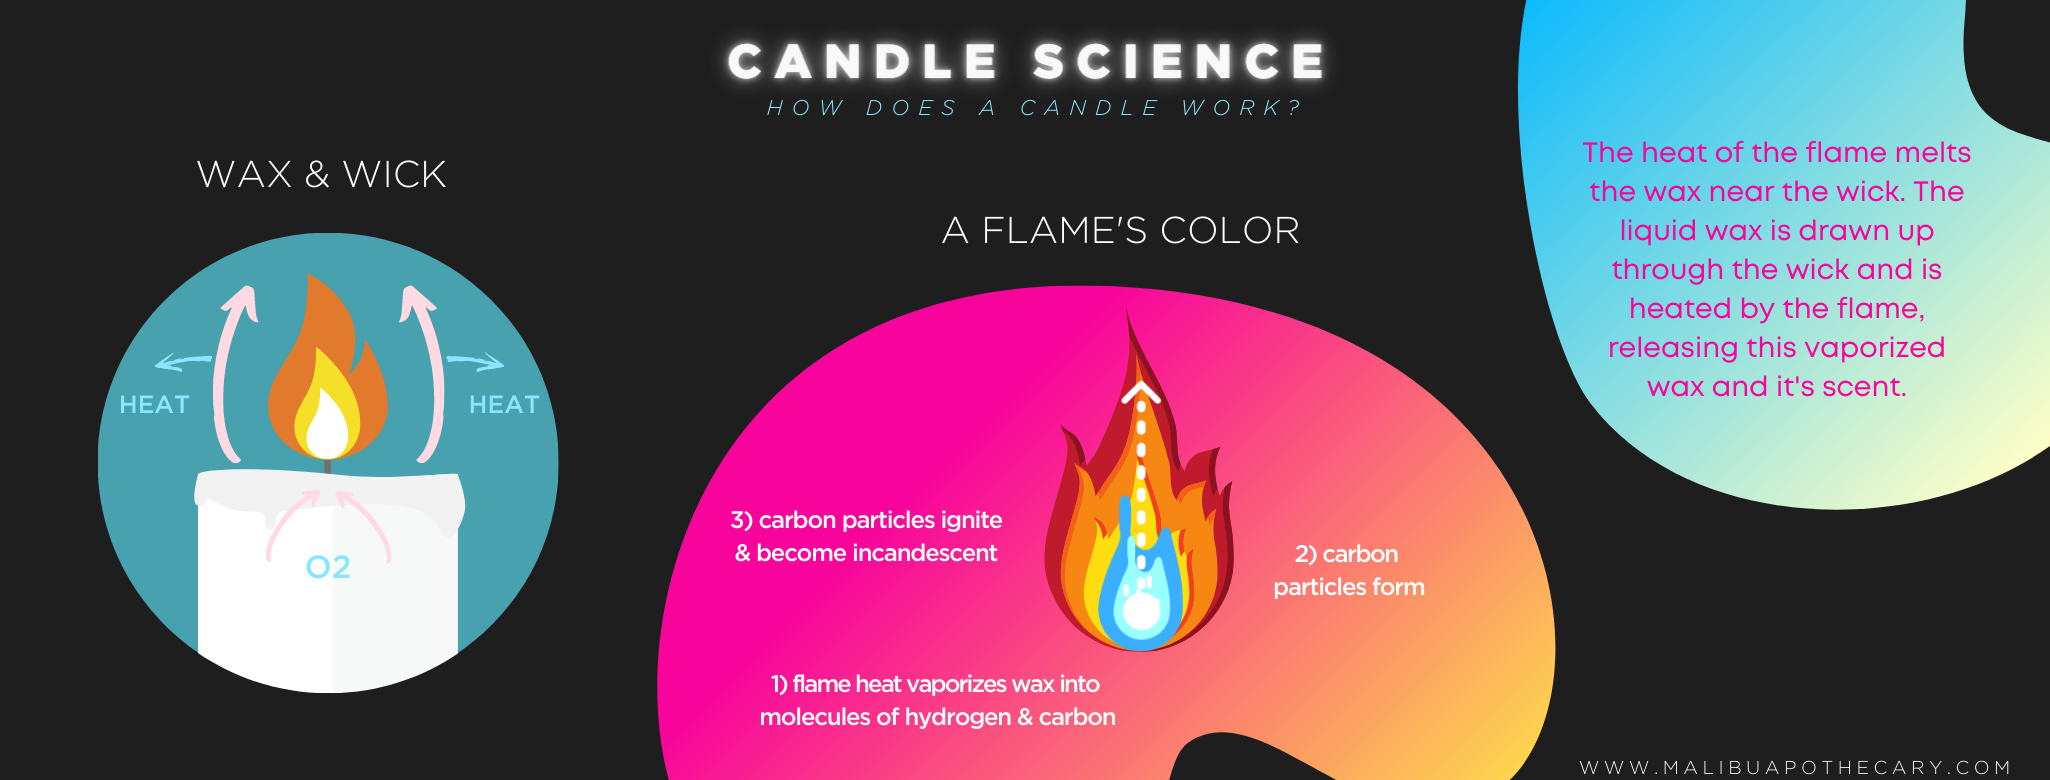 How to Make Votive Candles - CandleScience